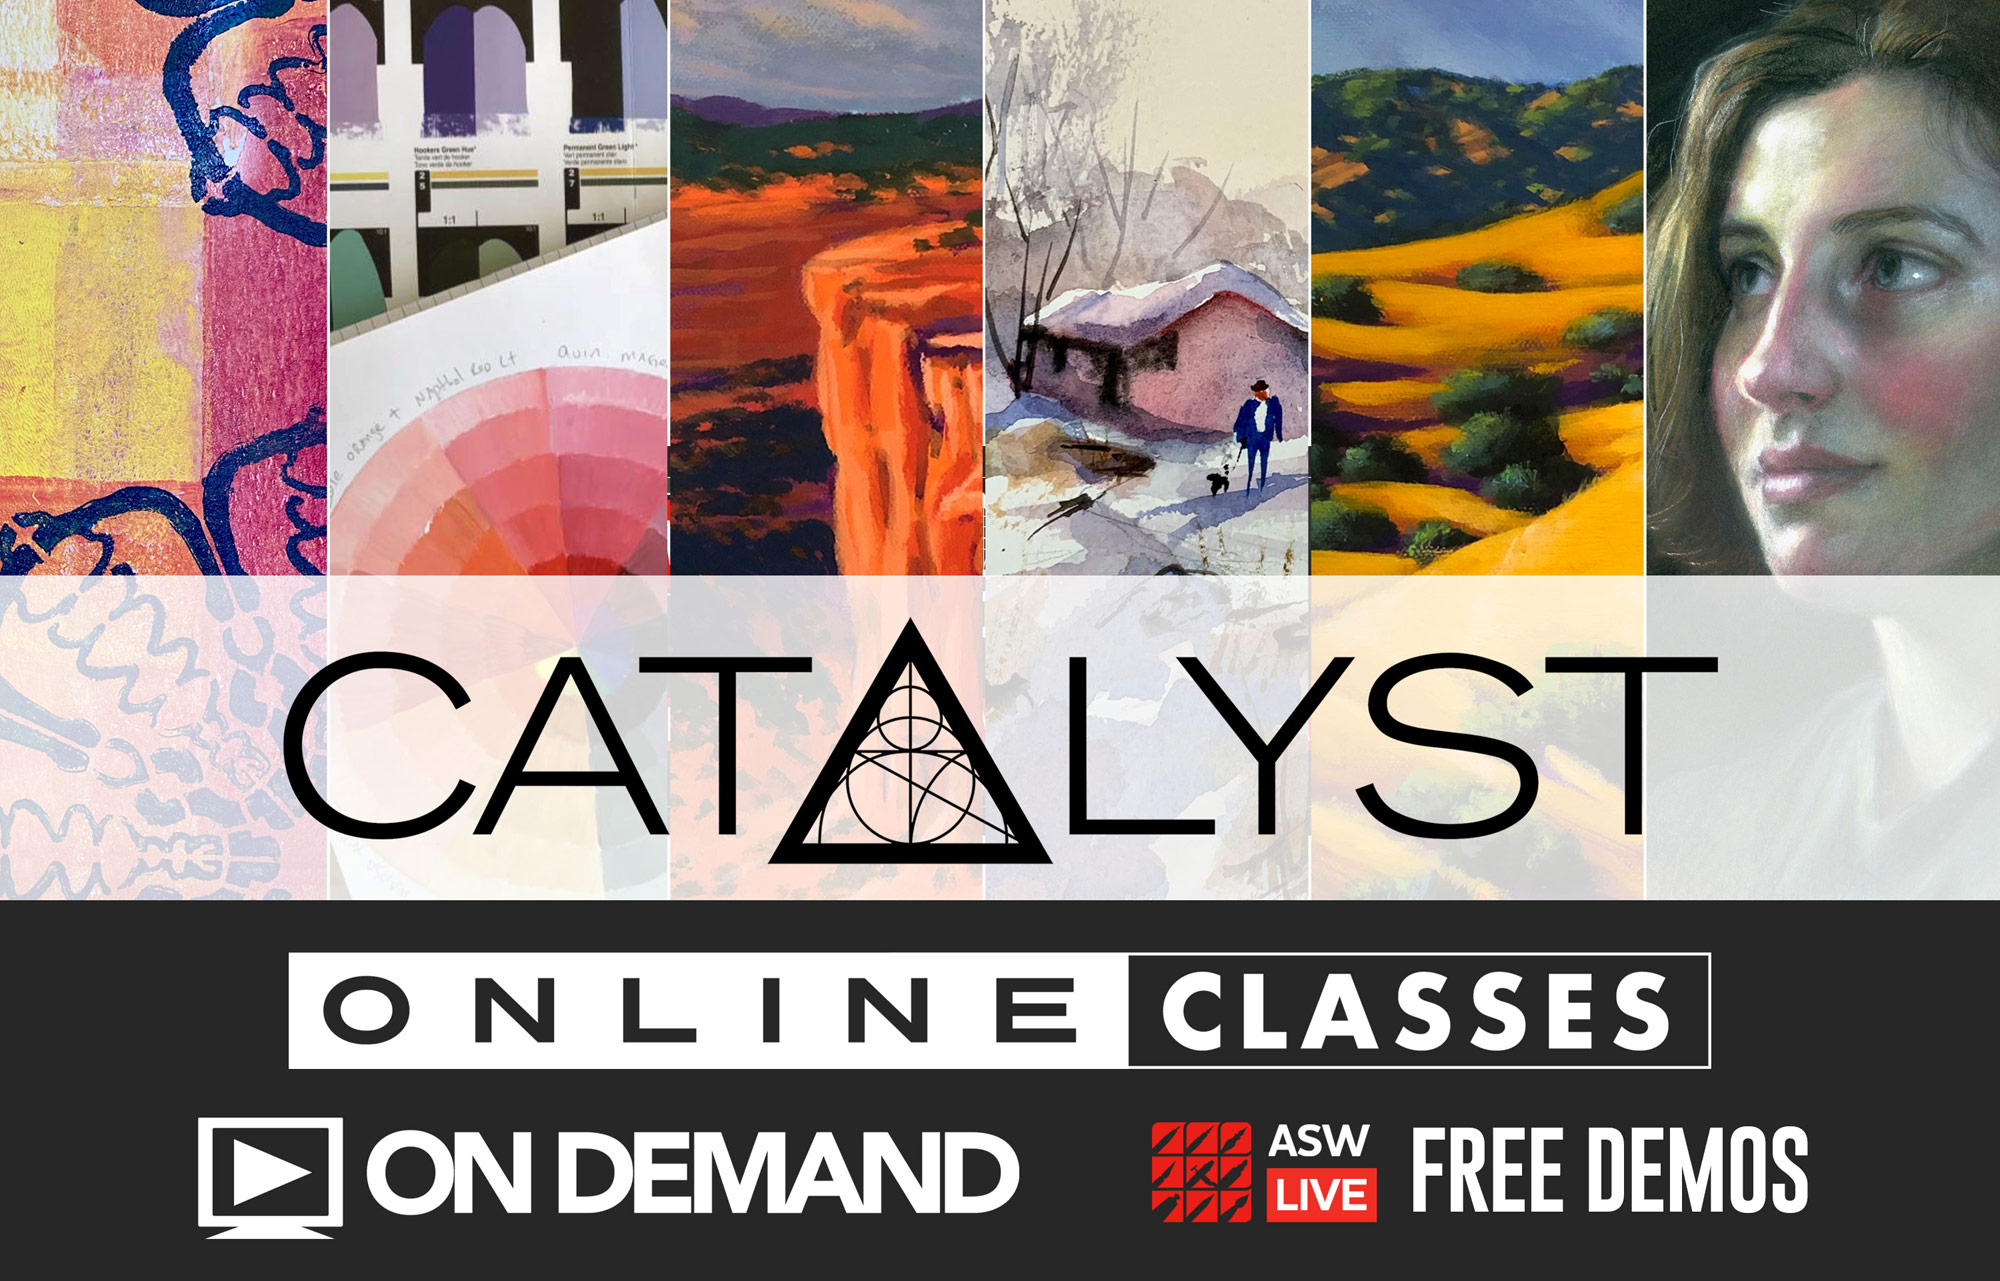 Catalyst Online Classes. On Demand. ASW Live Free Demos.